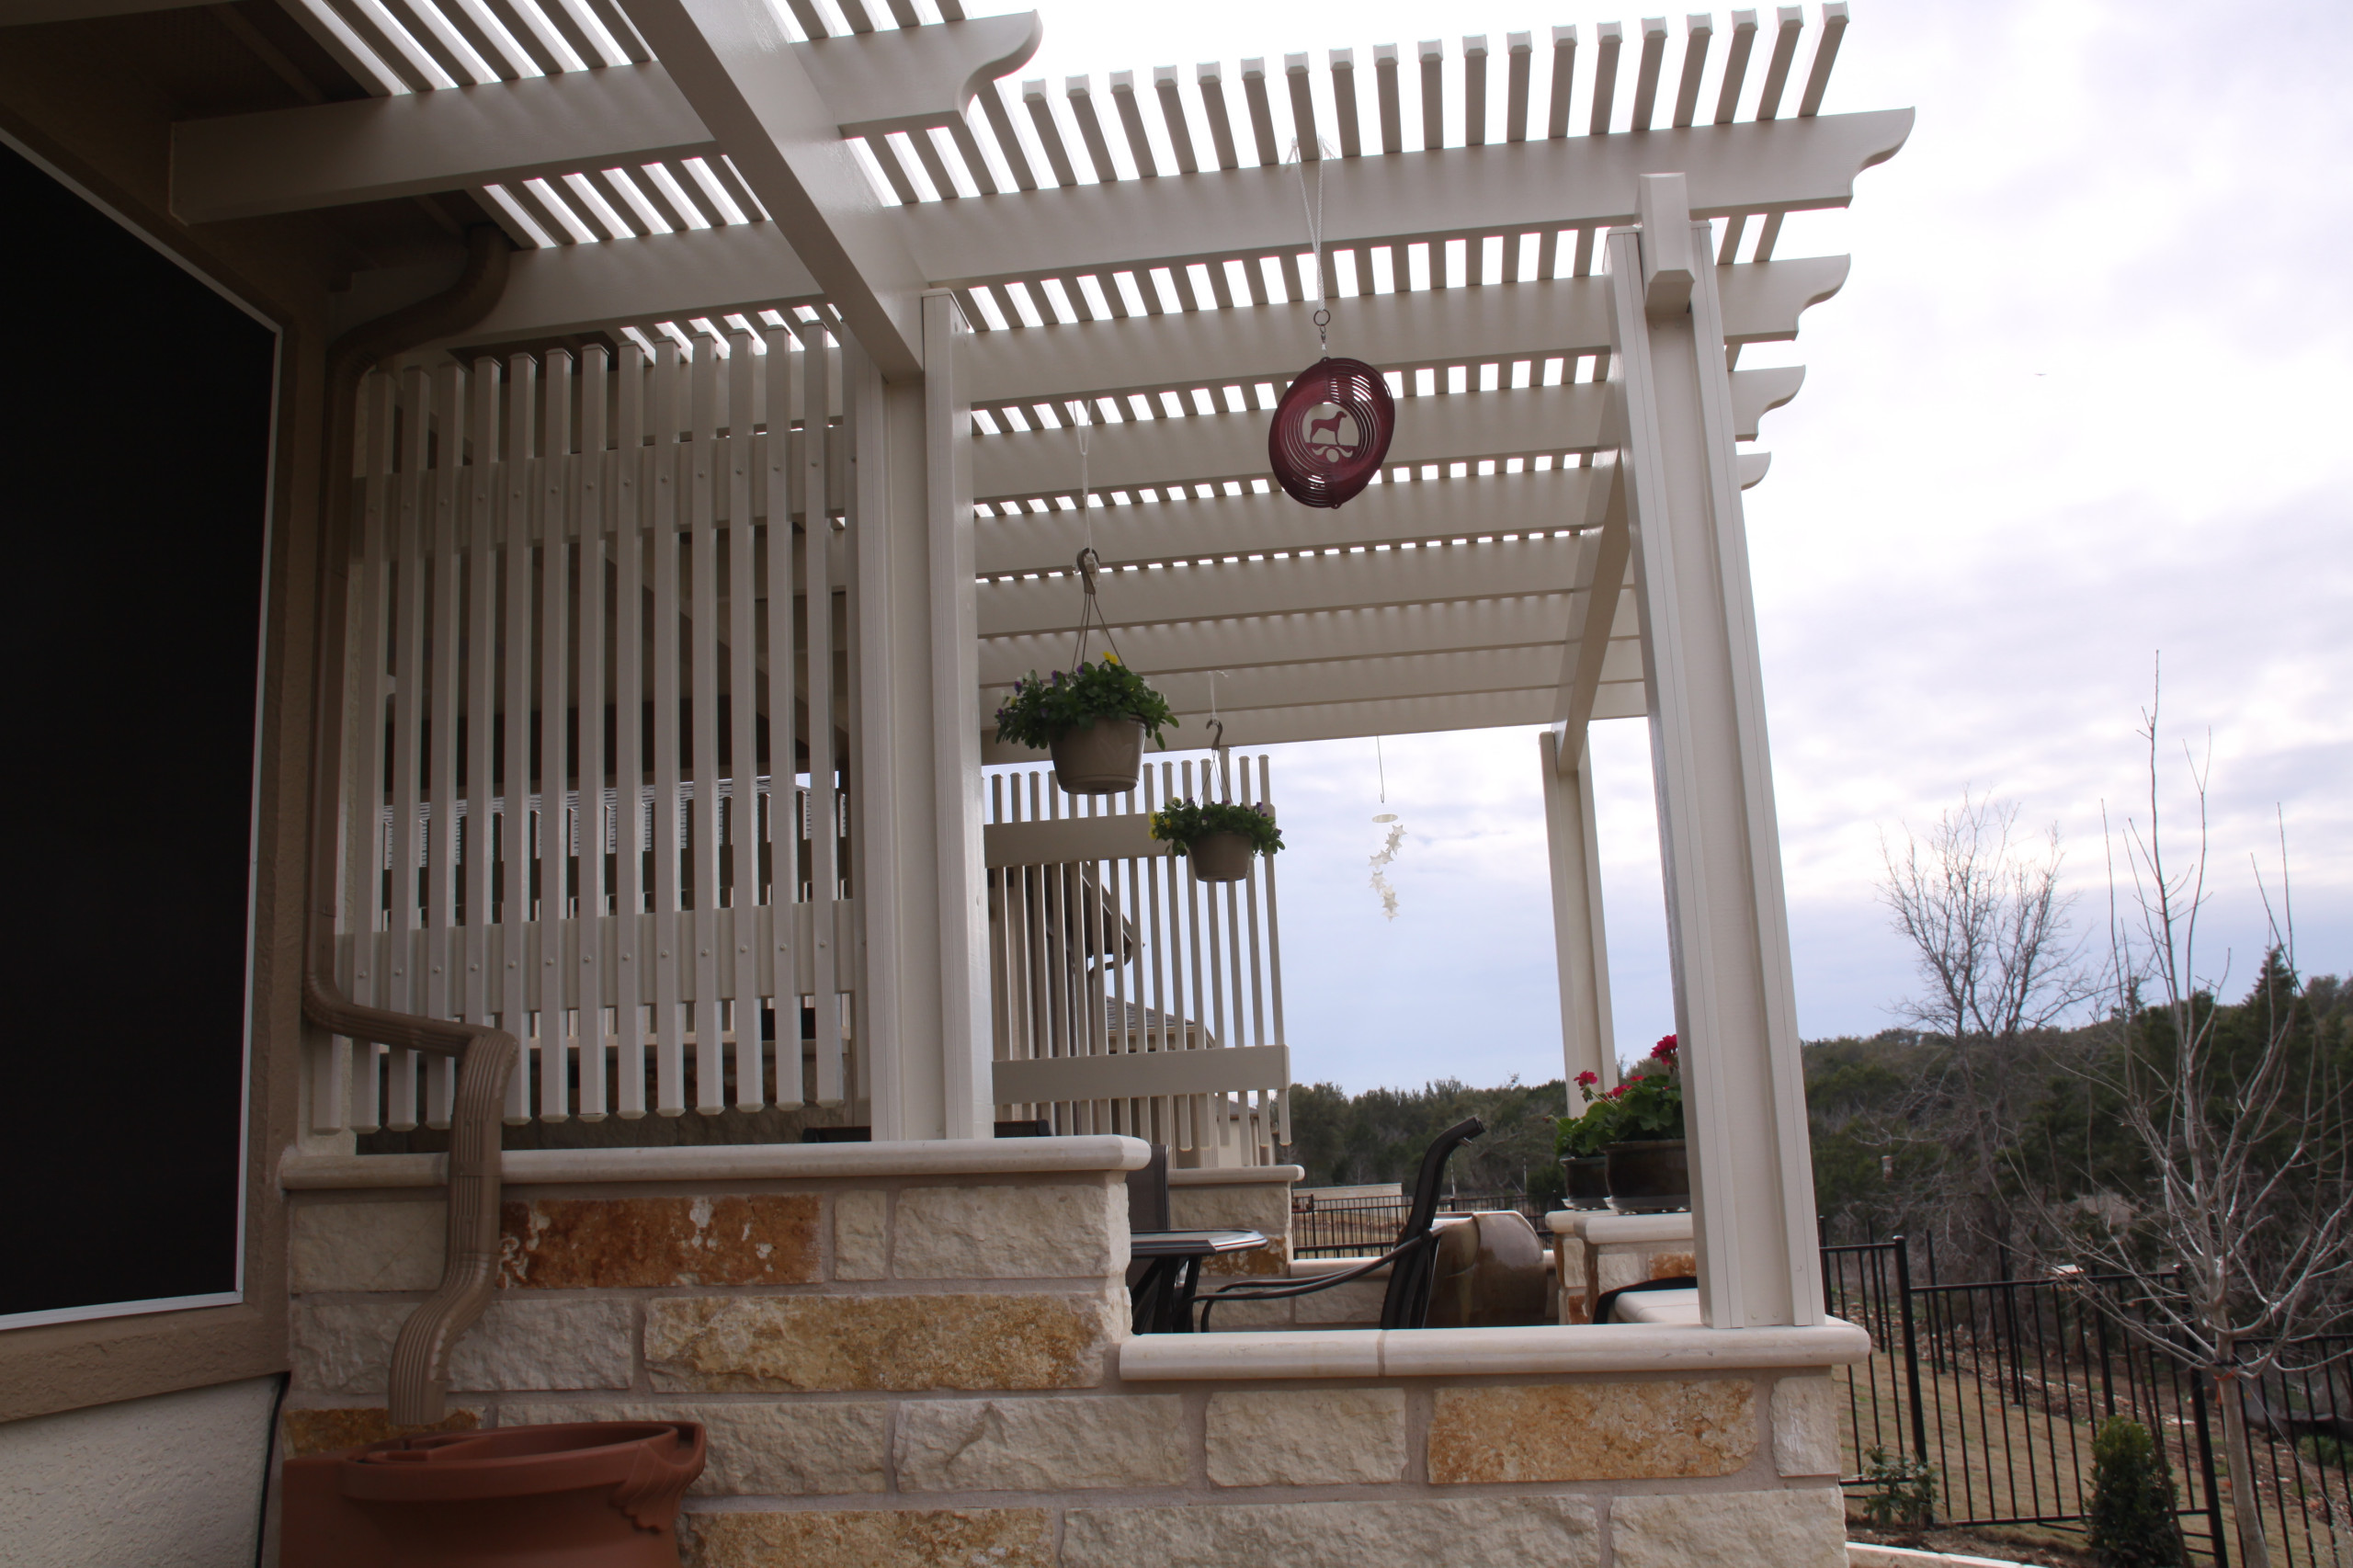 Patio extension with decorative Alumawood "diffused" pergola and privacy slats